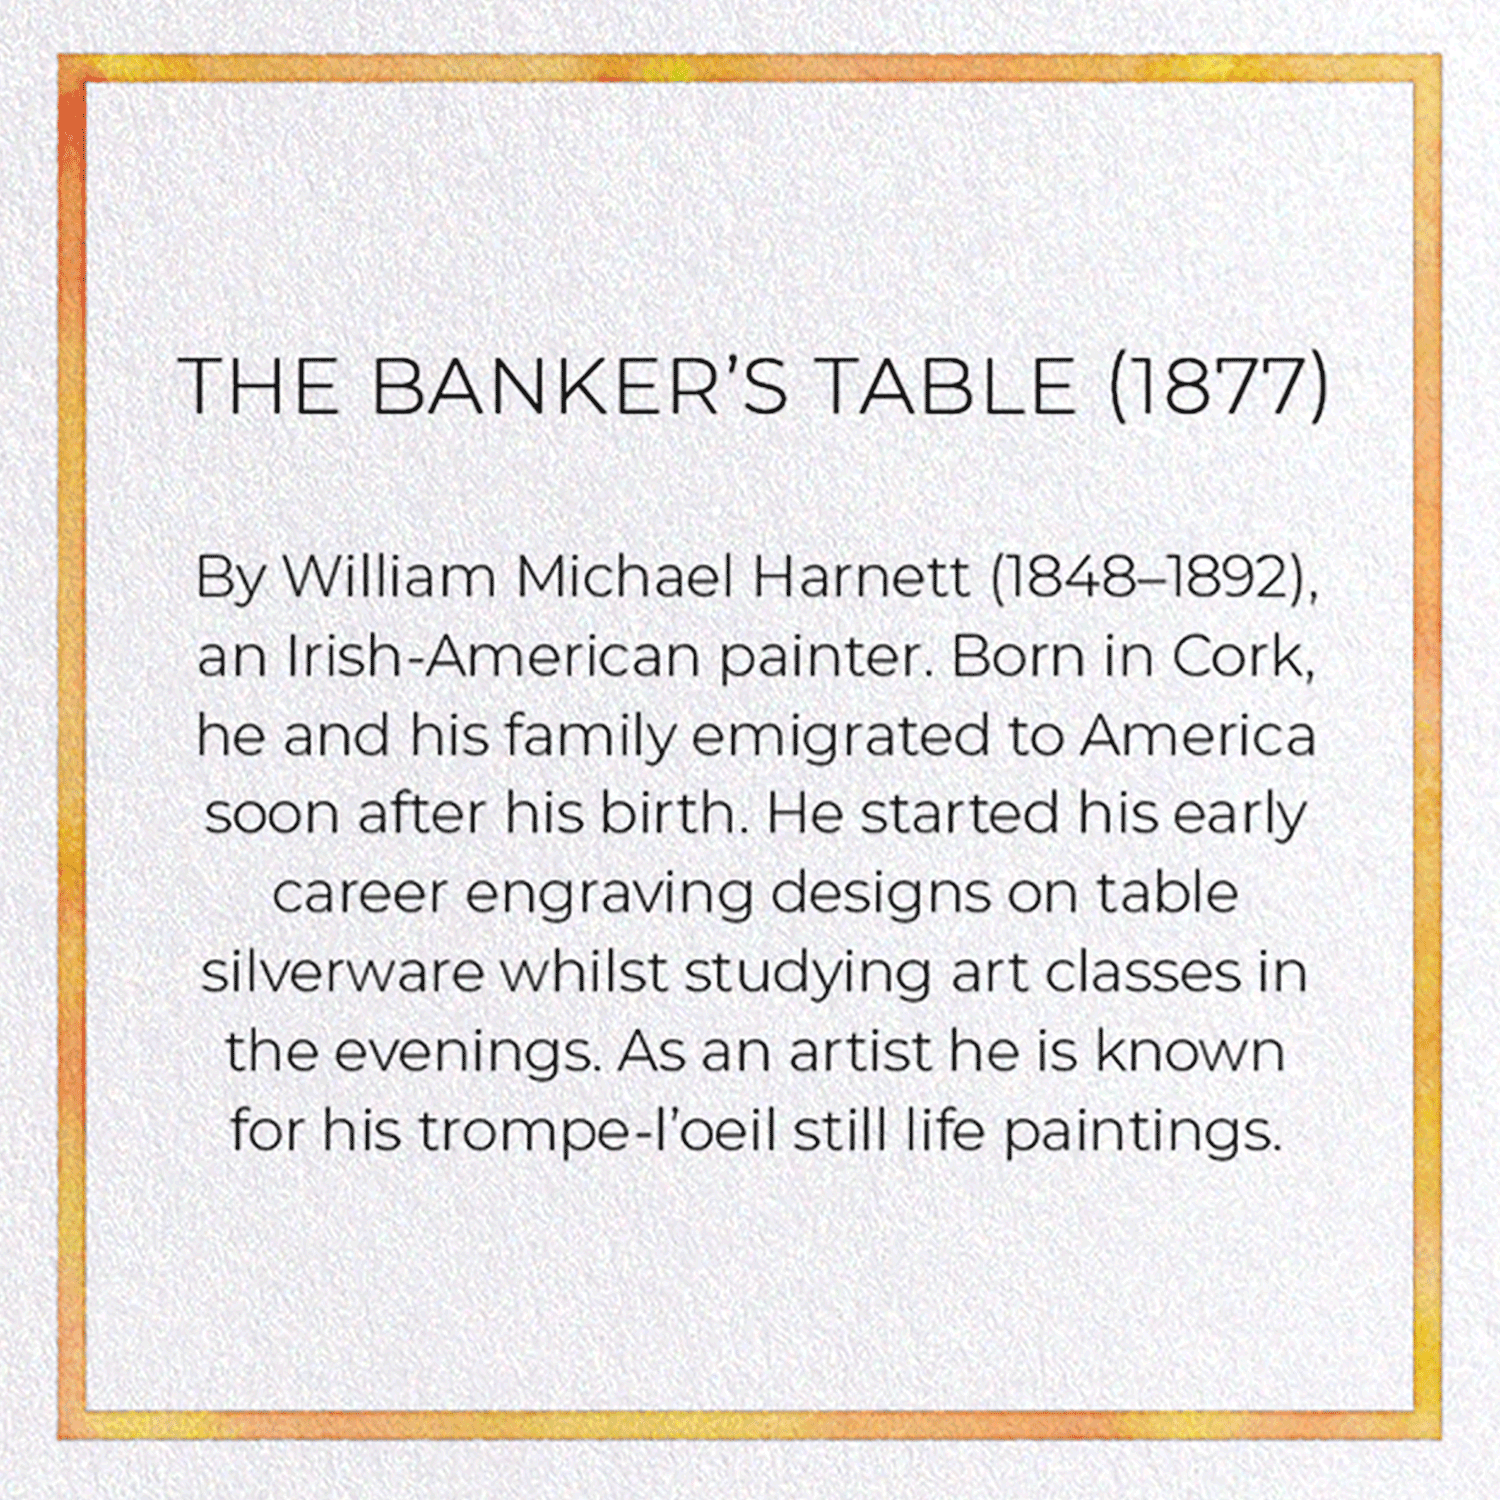 THE BANKER’S TABLE (1877): Painting Greeting Card